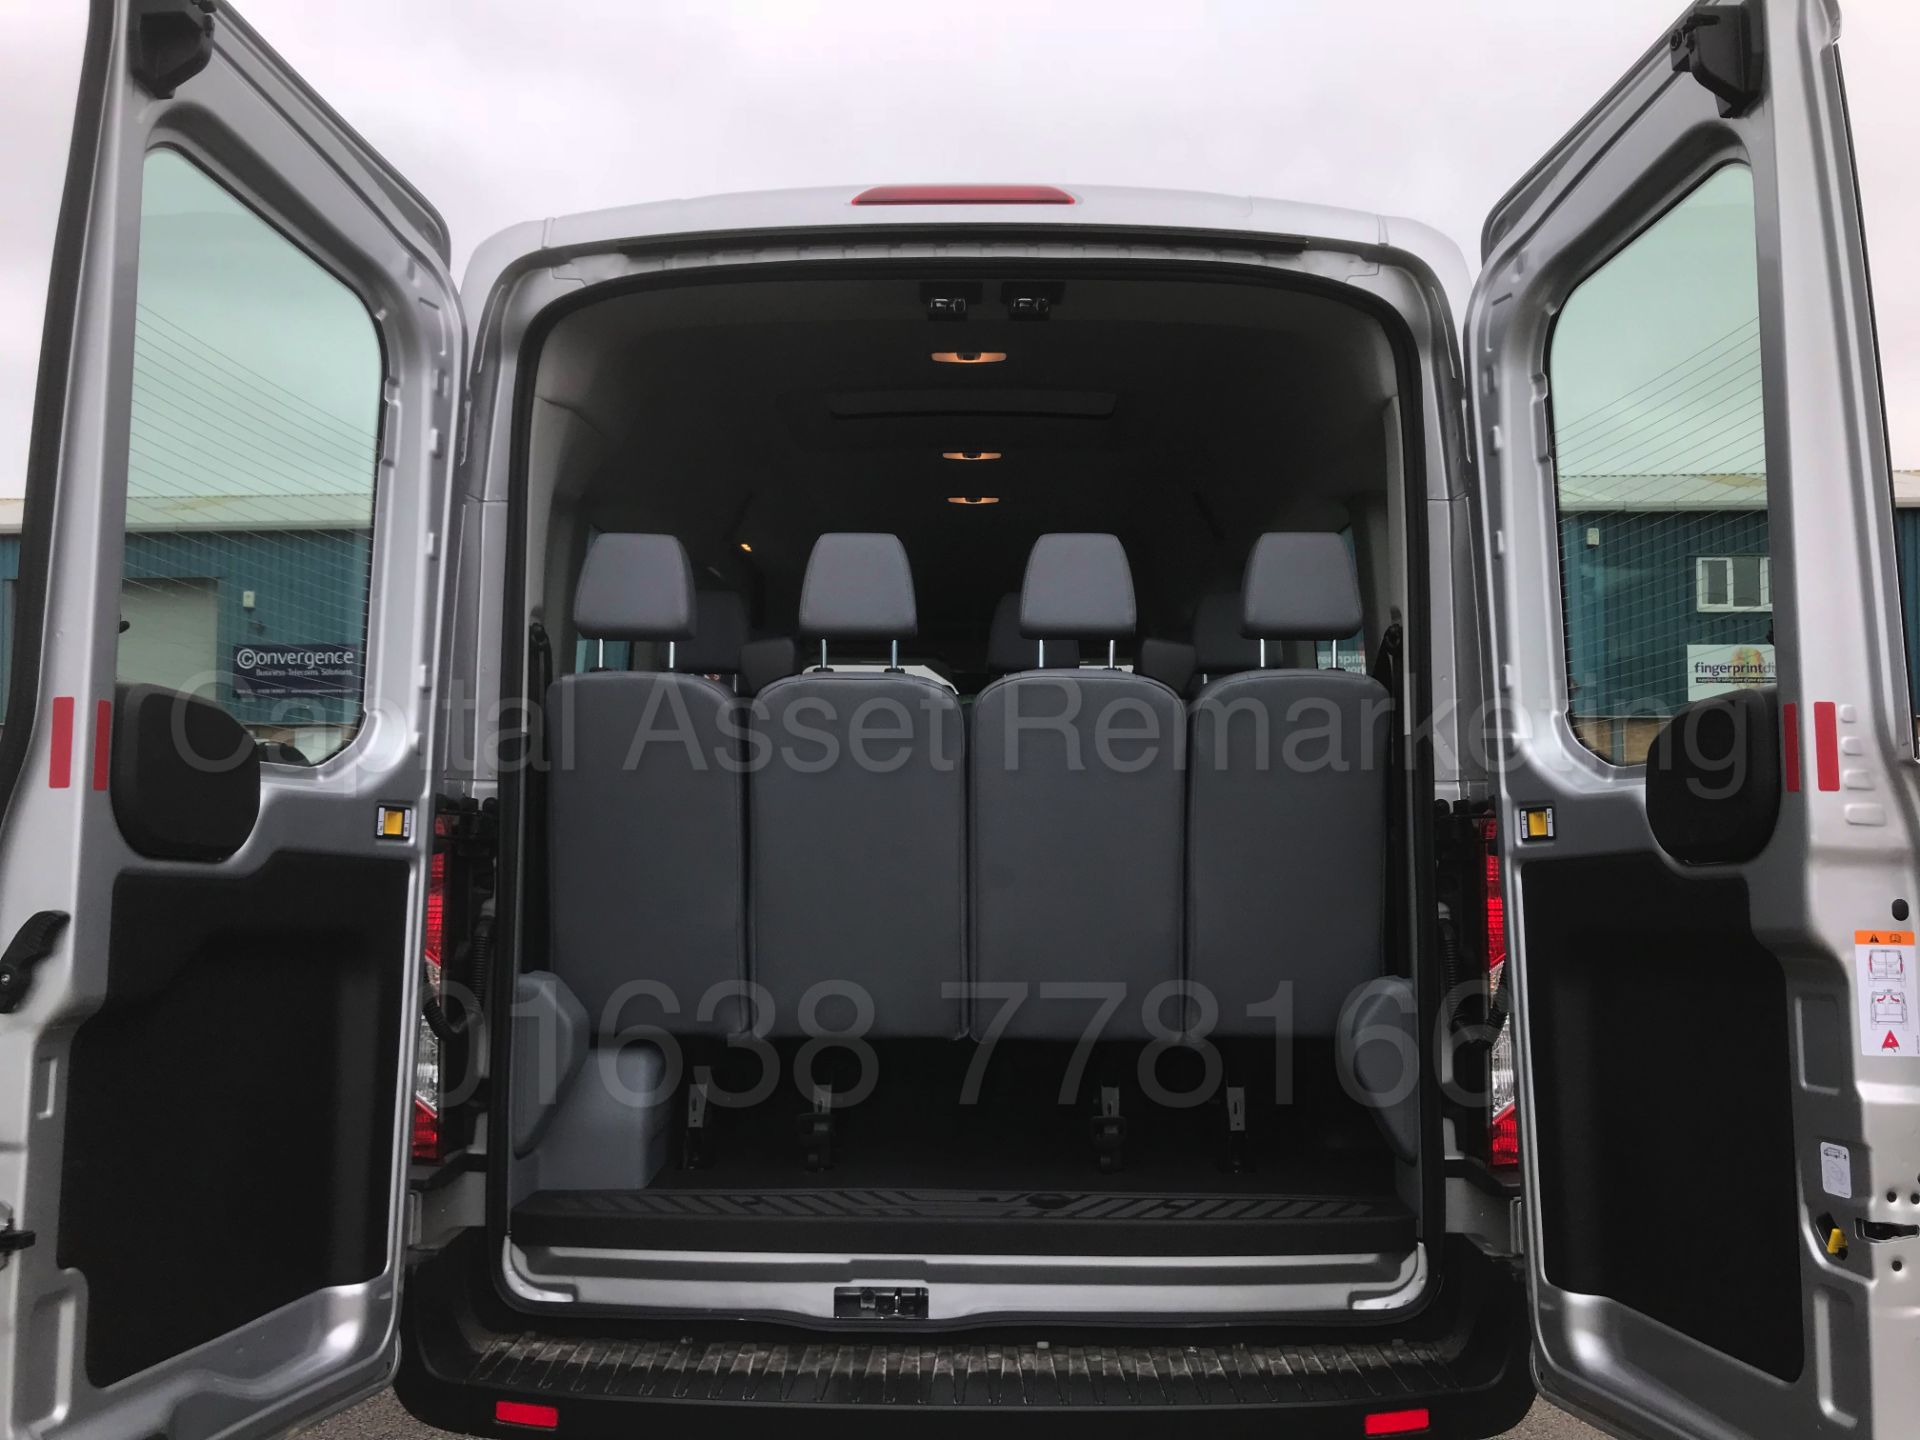 (On Sale) FORD TRANSIT LWB '15 SEATER MINI-BUS' (2018) '2.2 TDCI -125 BHP- 6 SPEED' 130 MILES ONLY ! - Image 33 of 50